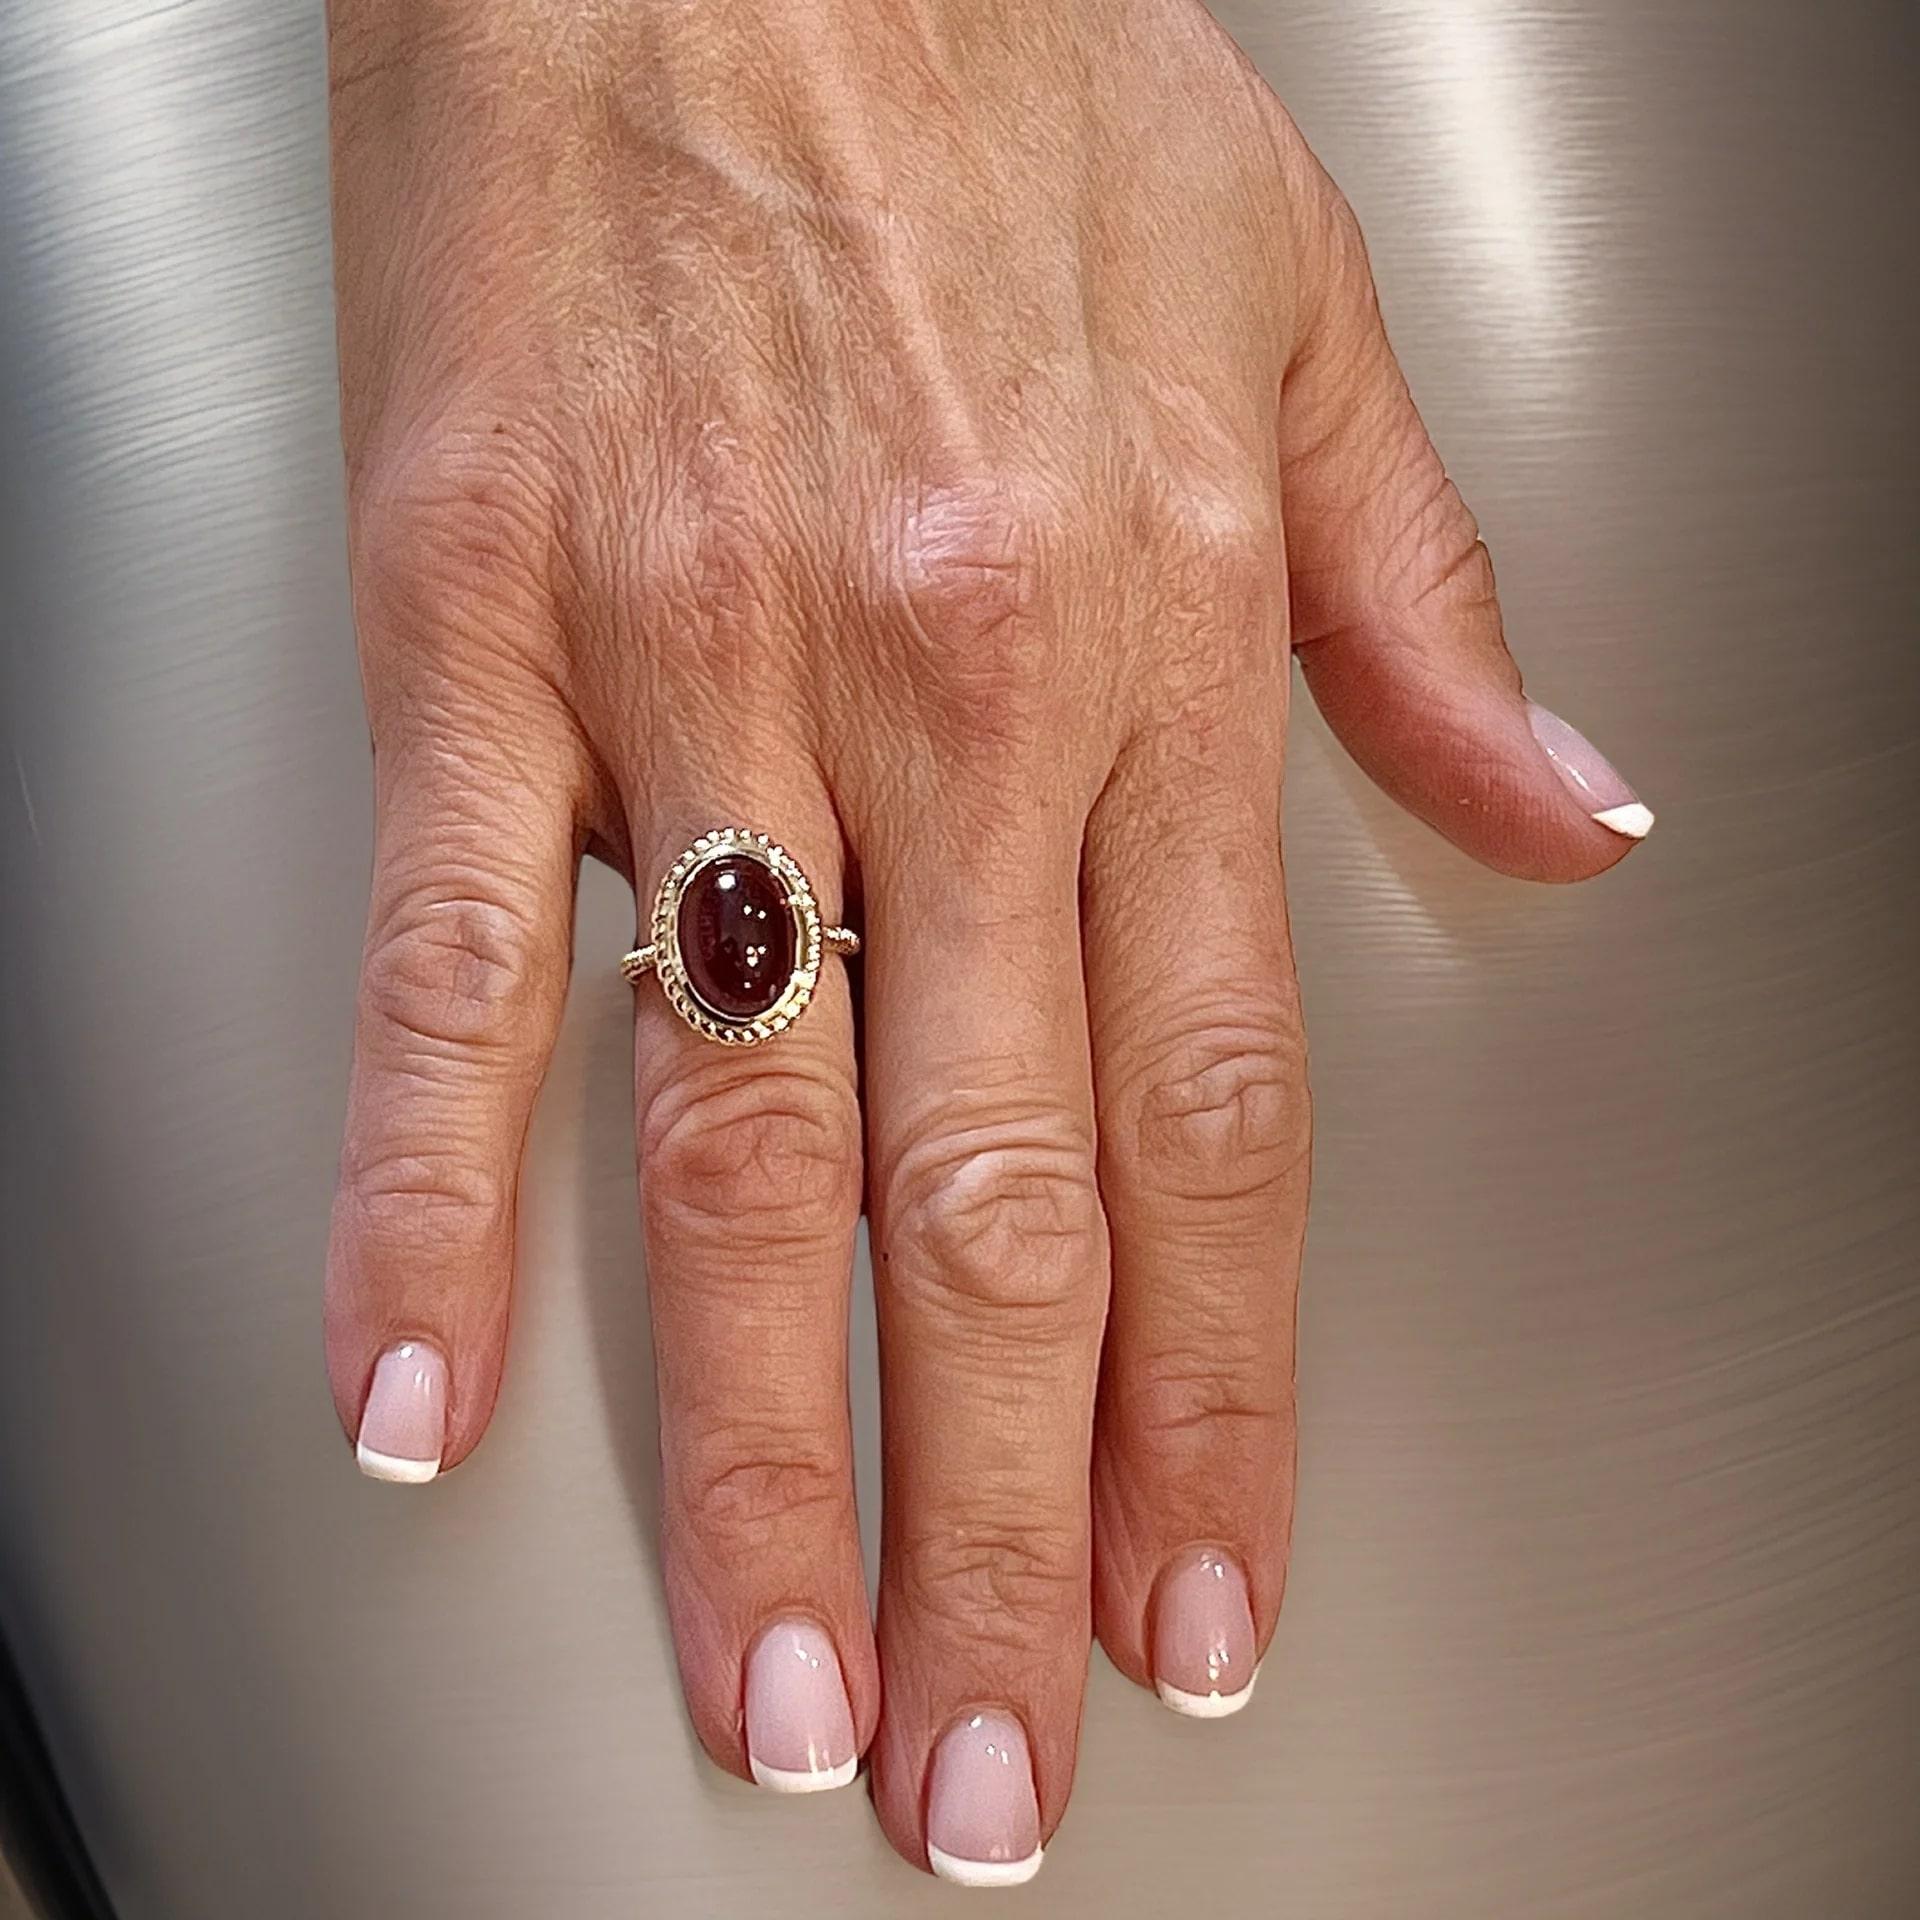 Natural Solitaire Finely Faceted Quality Spessartite Garnet Ring 6.5 14k Y Gold 8.08 Cts Certified $3,150 310586

This is a Unique Custom Made Glamorous Piece of Jewelry!

Nothing says, “I Love you” more than Diamonds and Pearls!

This Solitaire